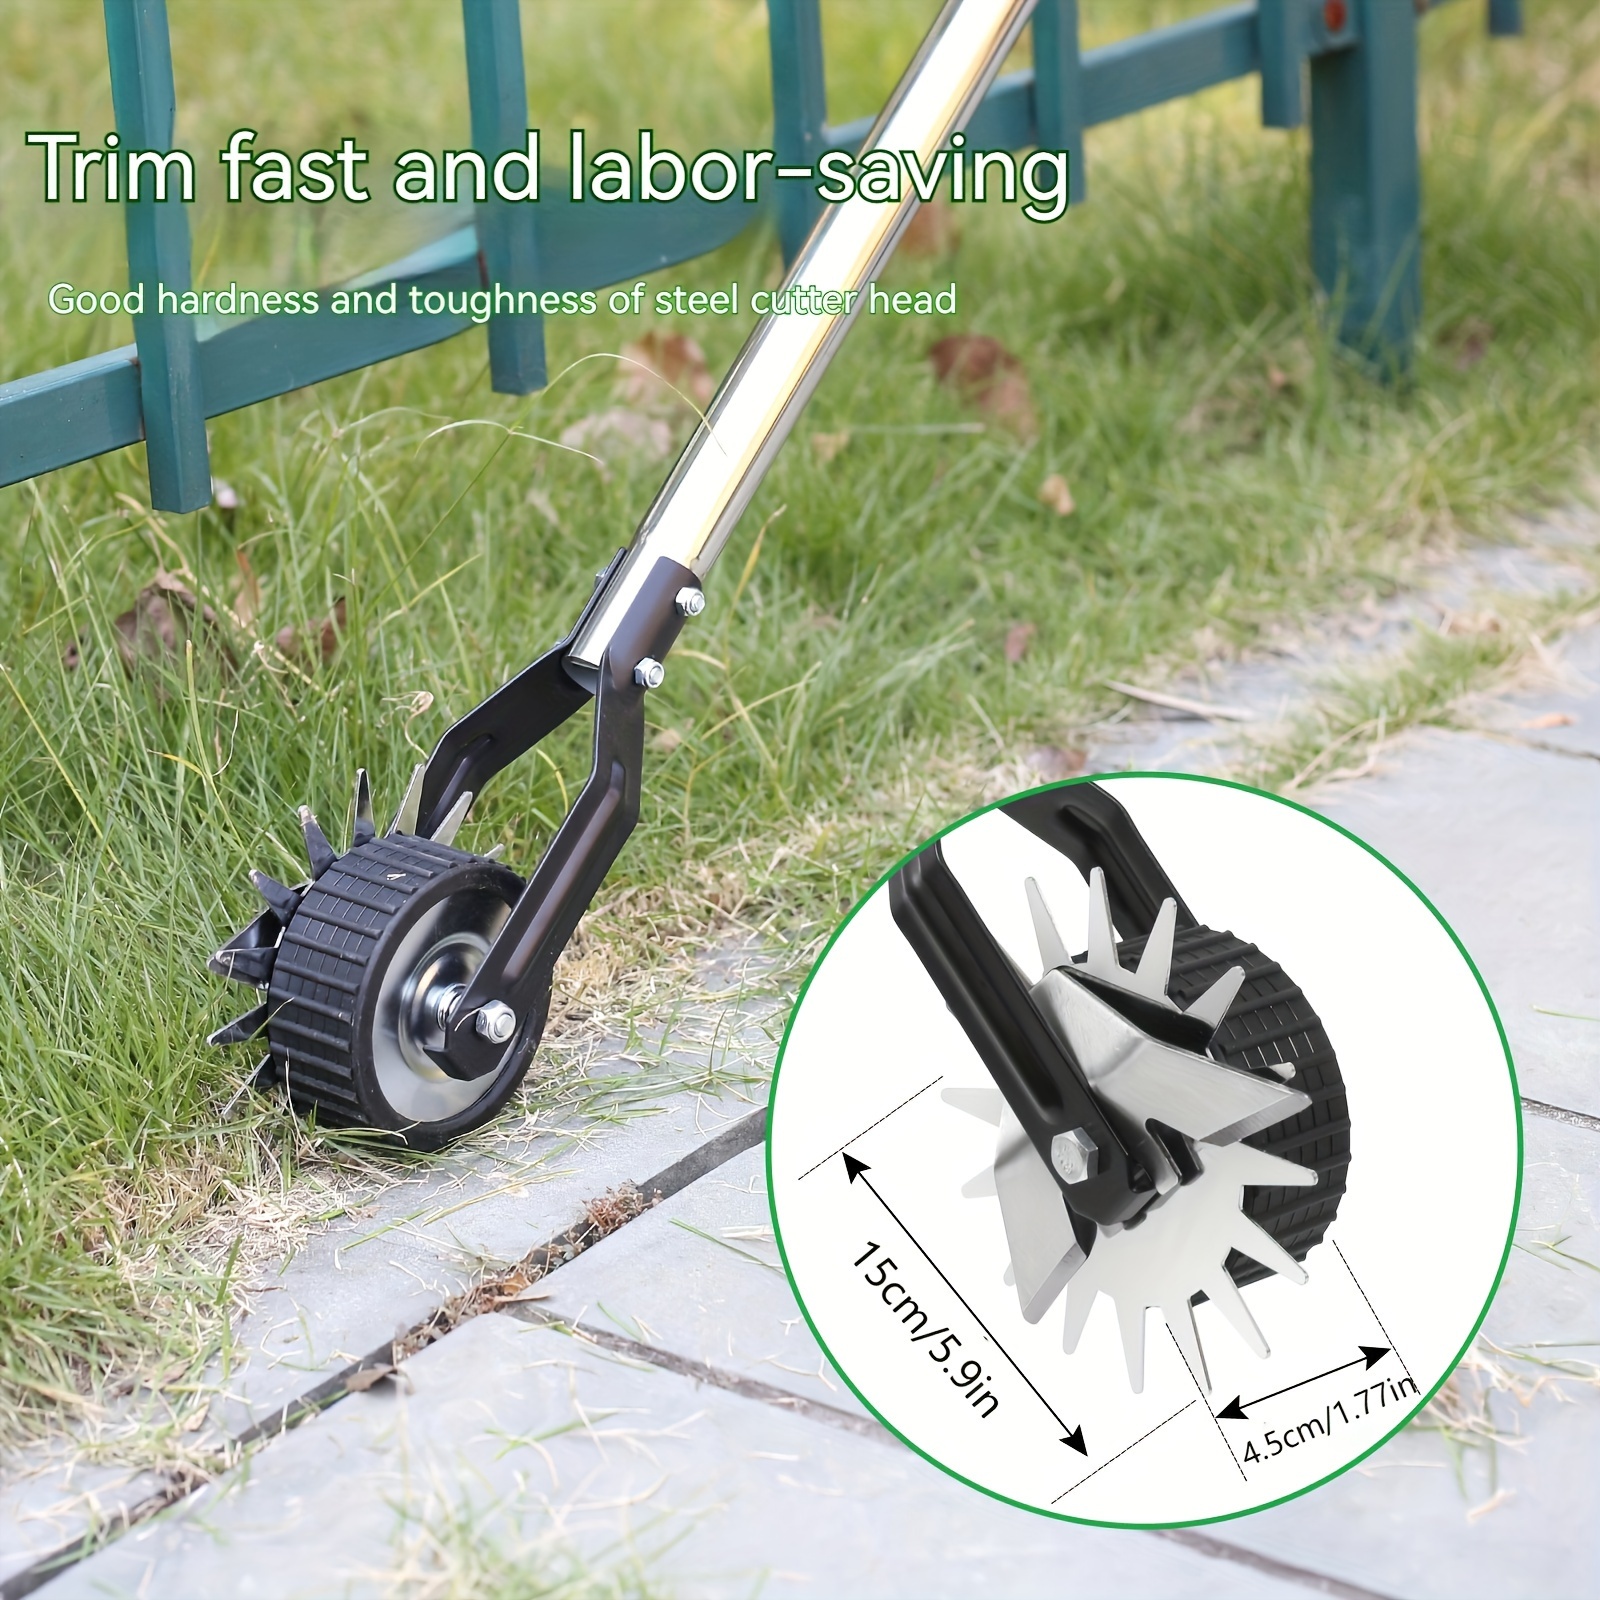 

Adjustable Manual Lawn Edger - Classic Style, Metal Handheld Trimmer With Alloy Steel Blades For Precision Removal & Sidewalk Edging